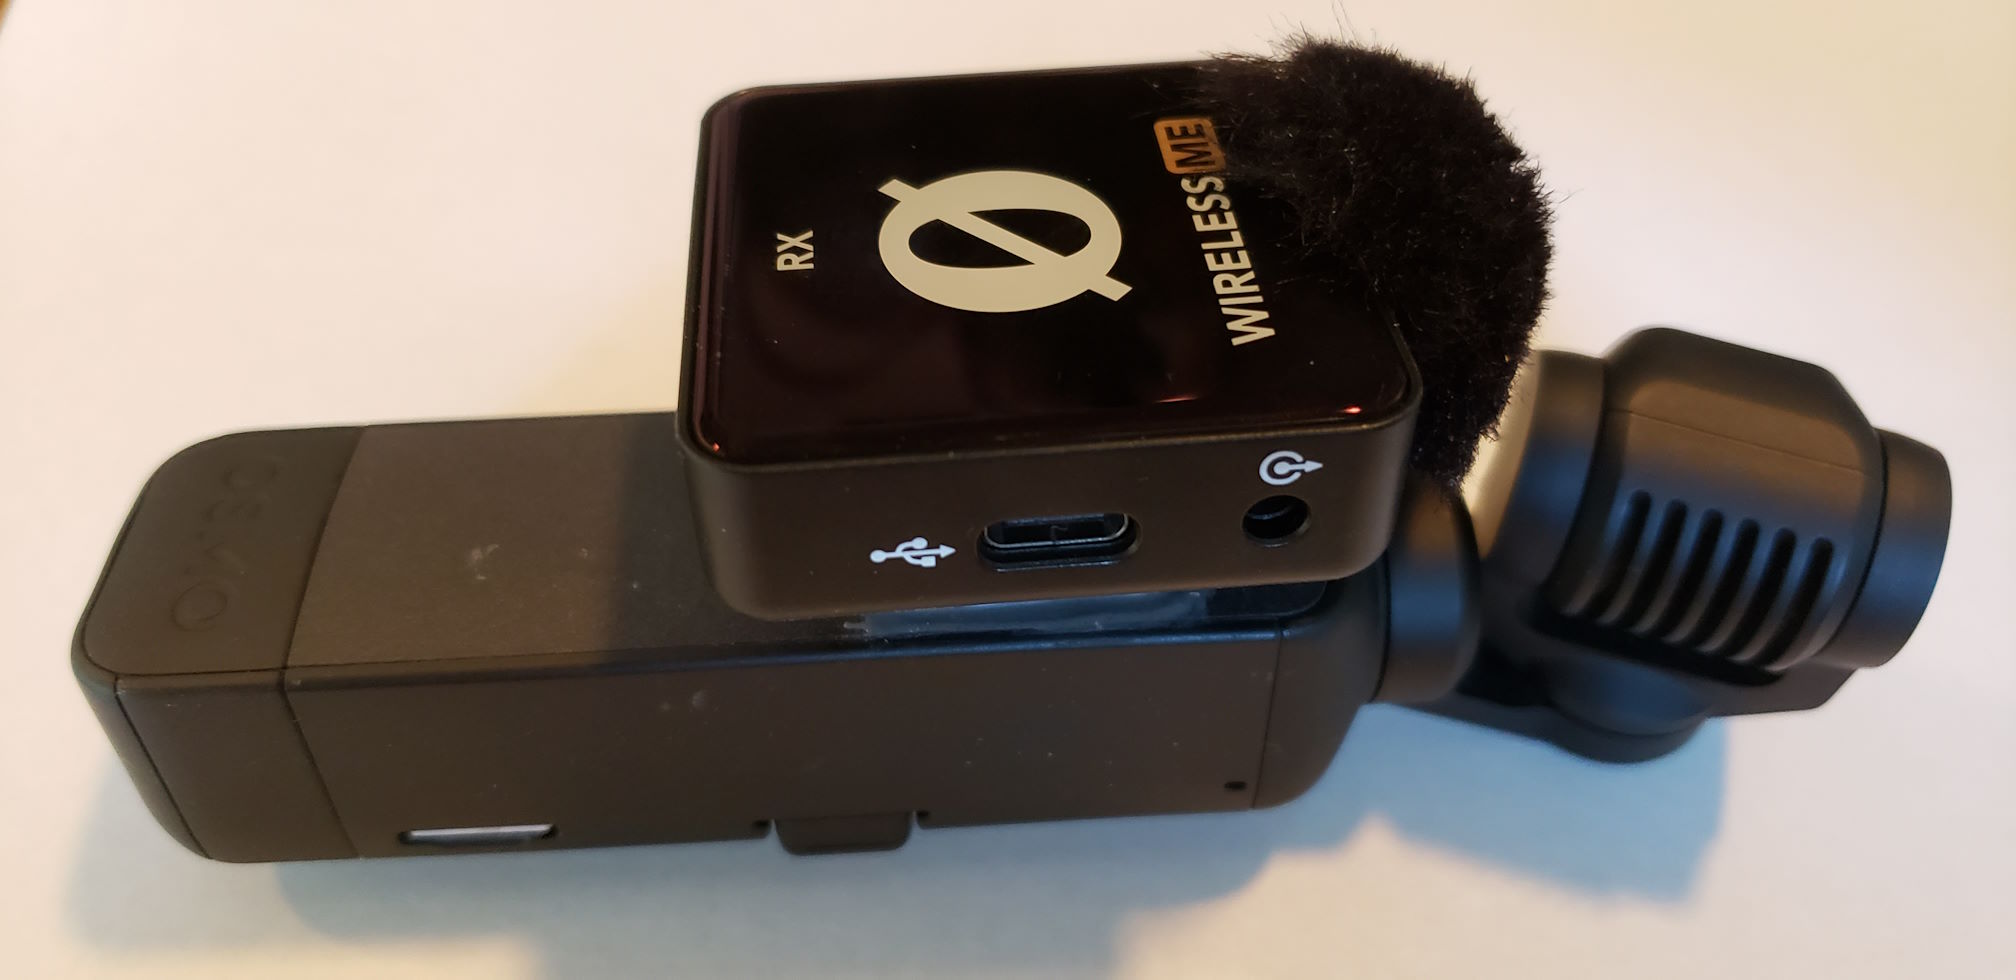 Pocket 2 with wireless receiver mounted